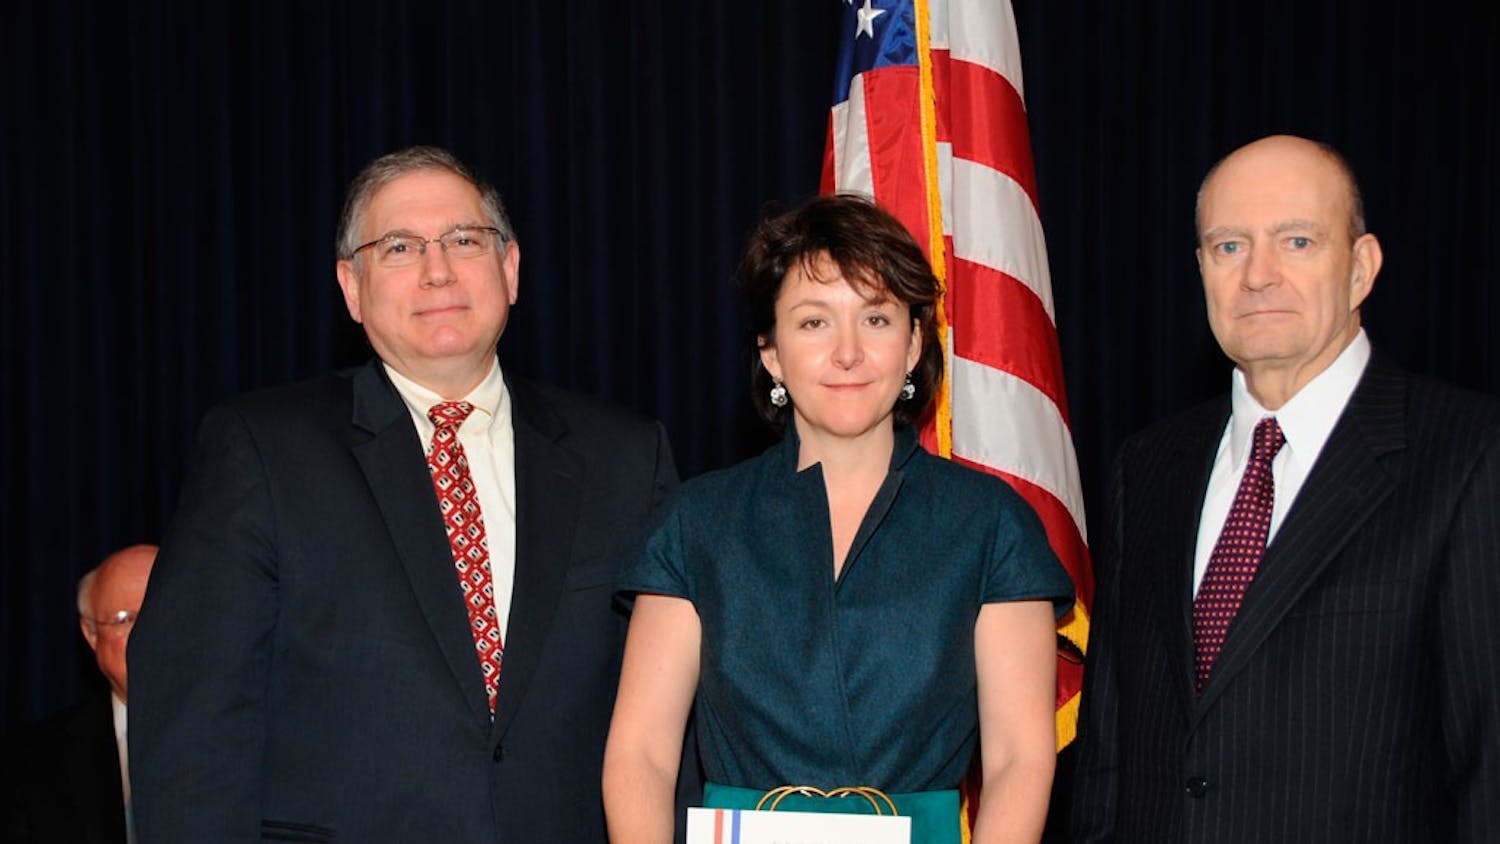 Lawrence Tabak (left) and Amy Heimberger (middle) pose for a photo in 2007.